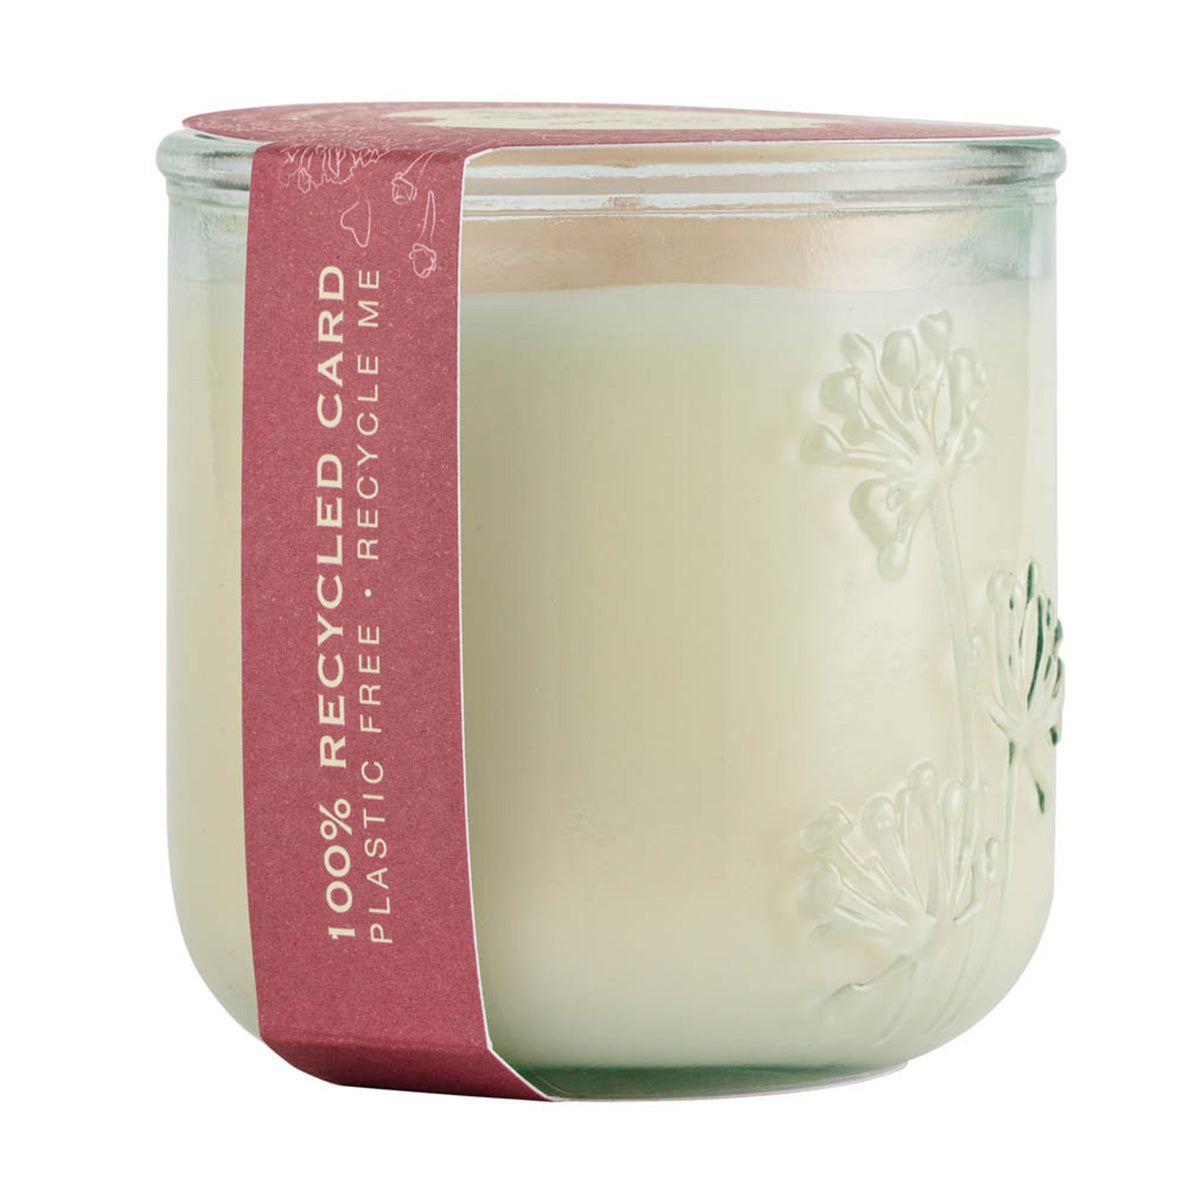 Geranium & Oud Candle in a Glass 280g